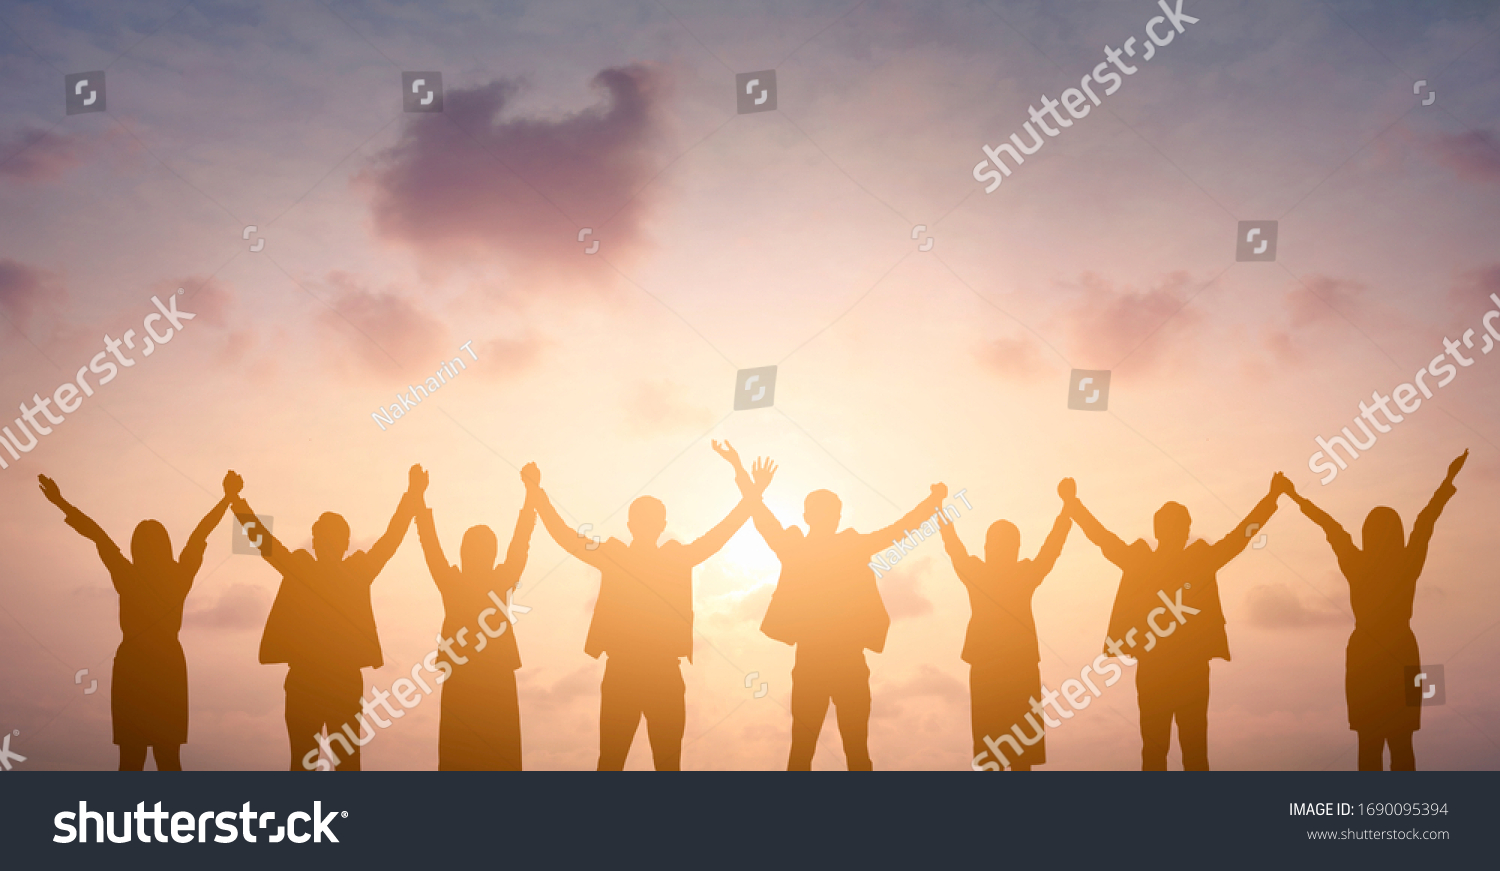 Silhouette of happy business teamwork making high hands over head in sunset sky background for business teamwork concept #1690095394